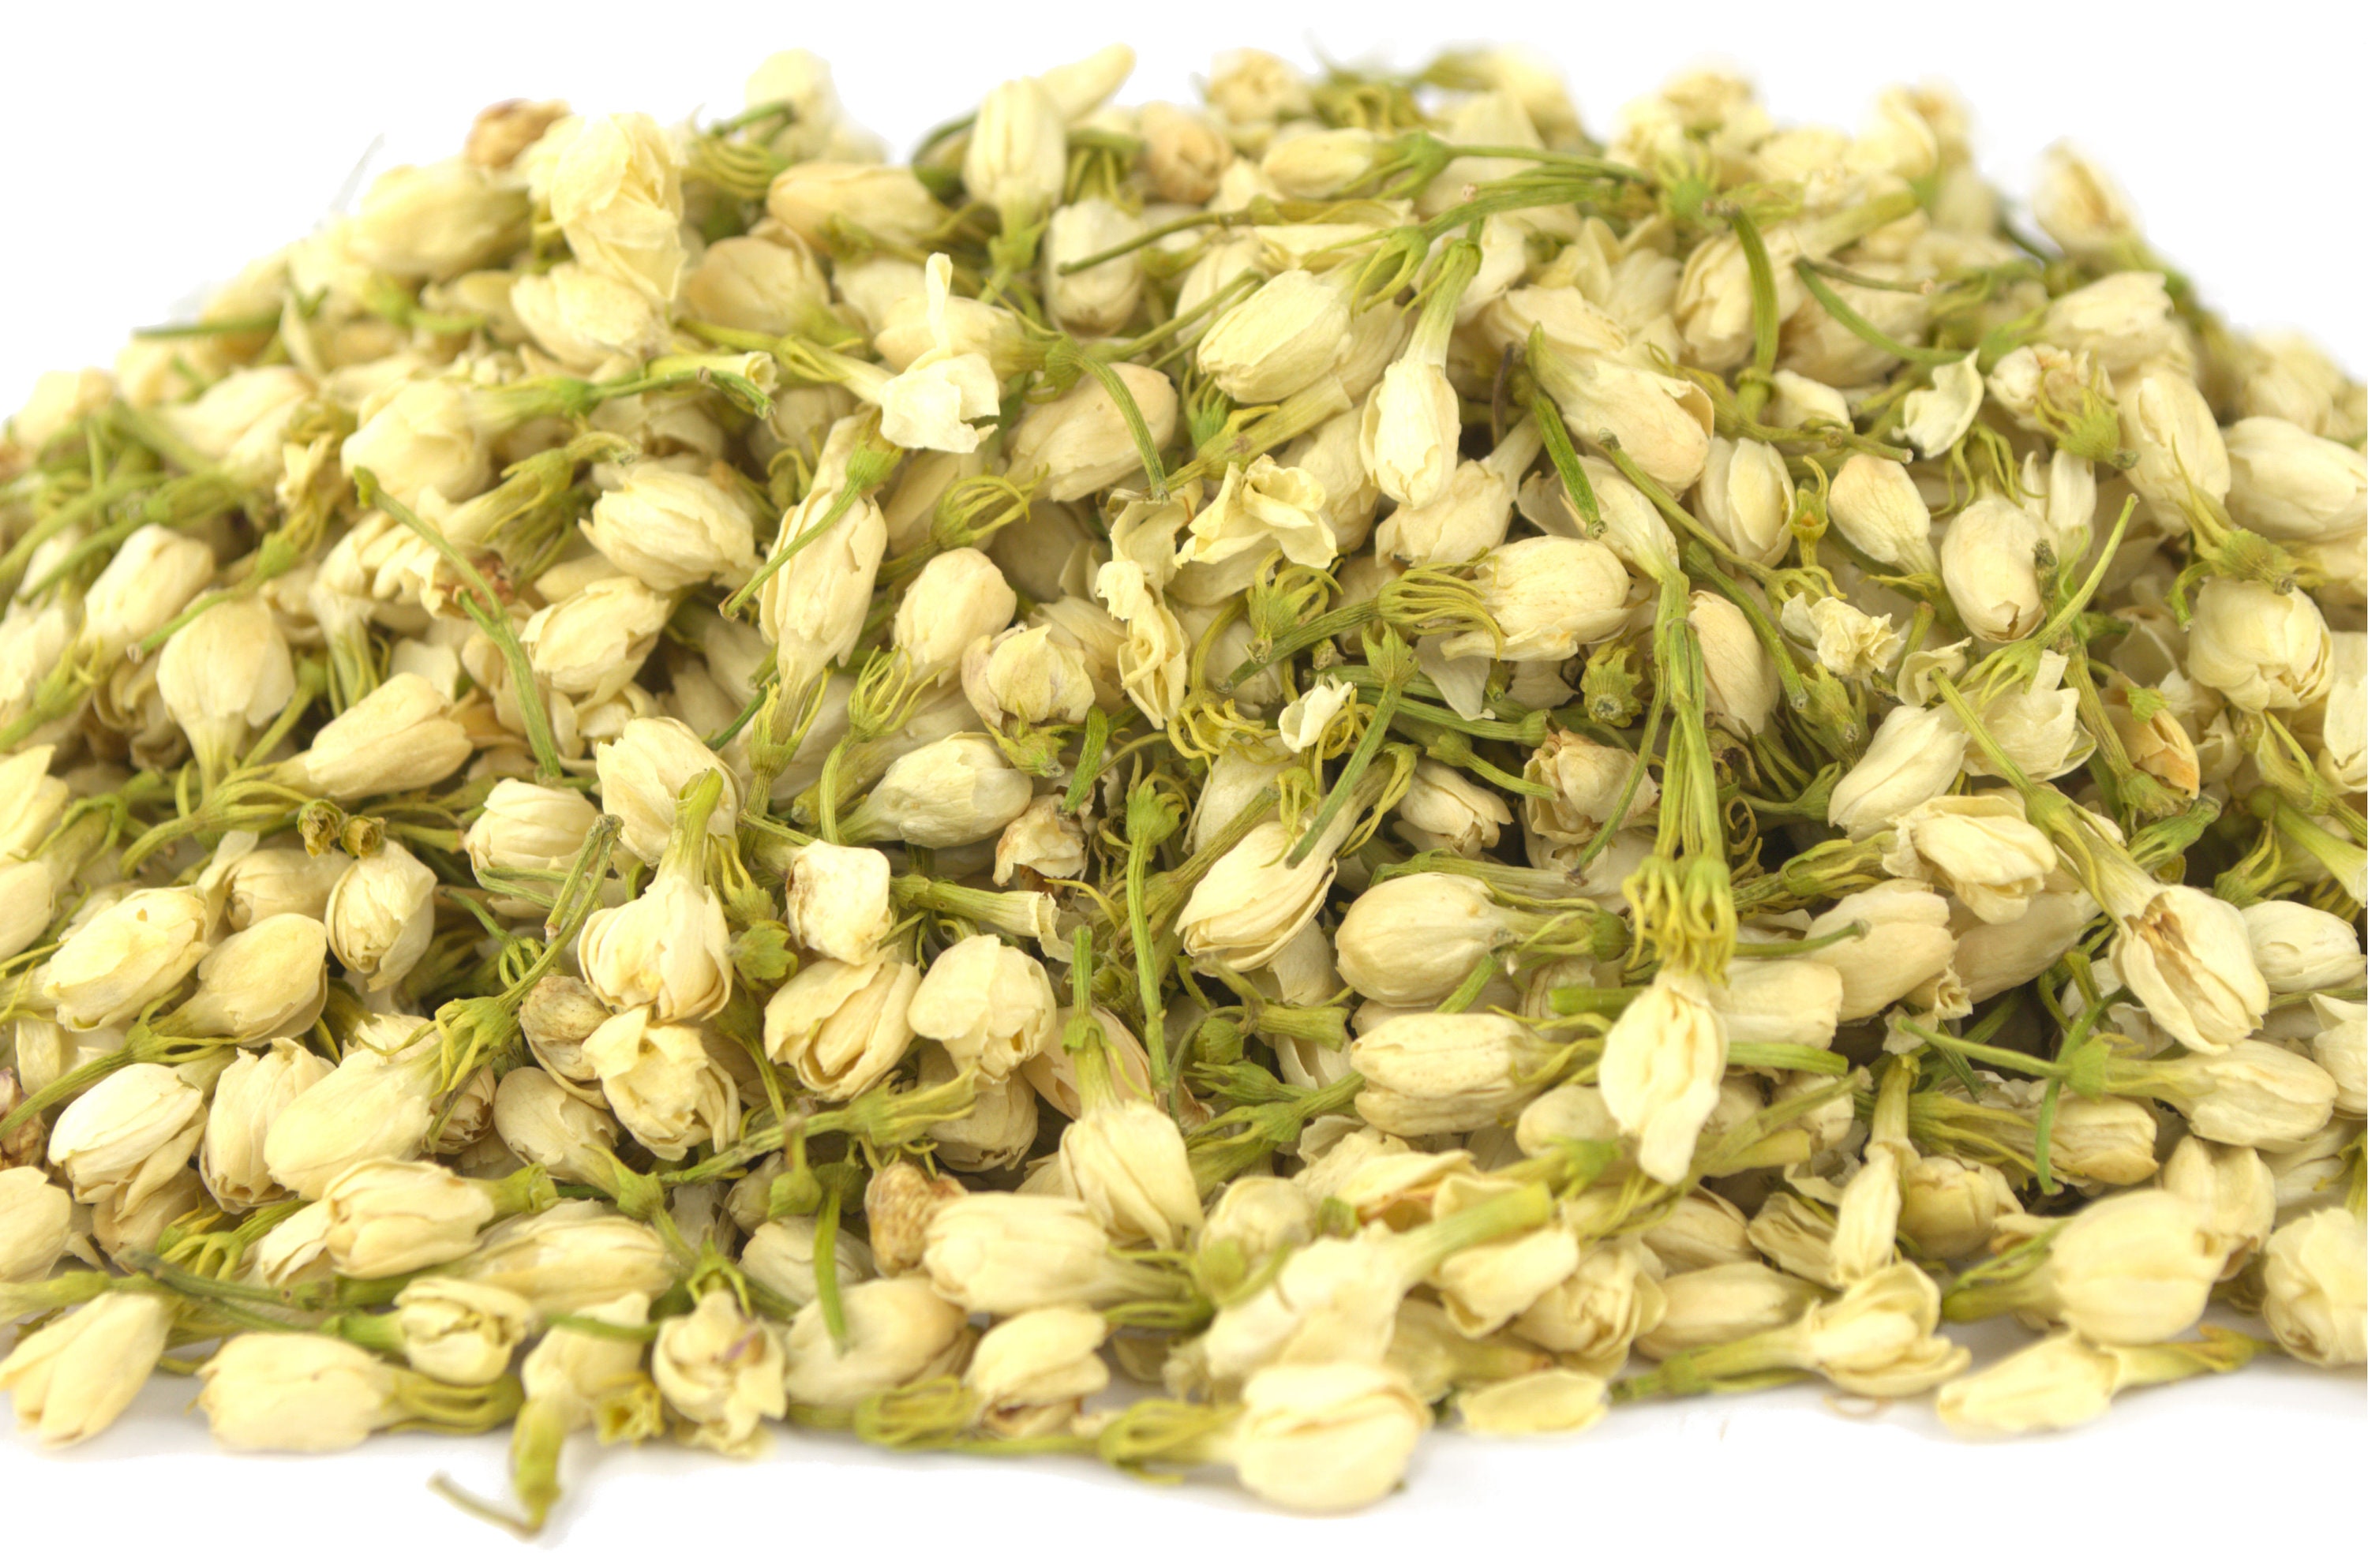 Top Natural Jasmine Buds Dried Jasmine Flowers For Incense Sachet Soap  Candle Making Beauty Material Supply Homemade Fragrance